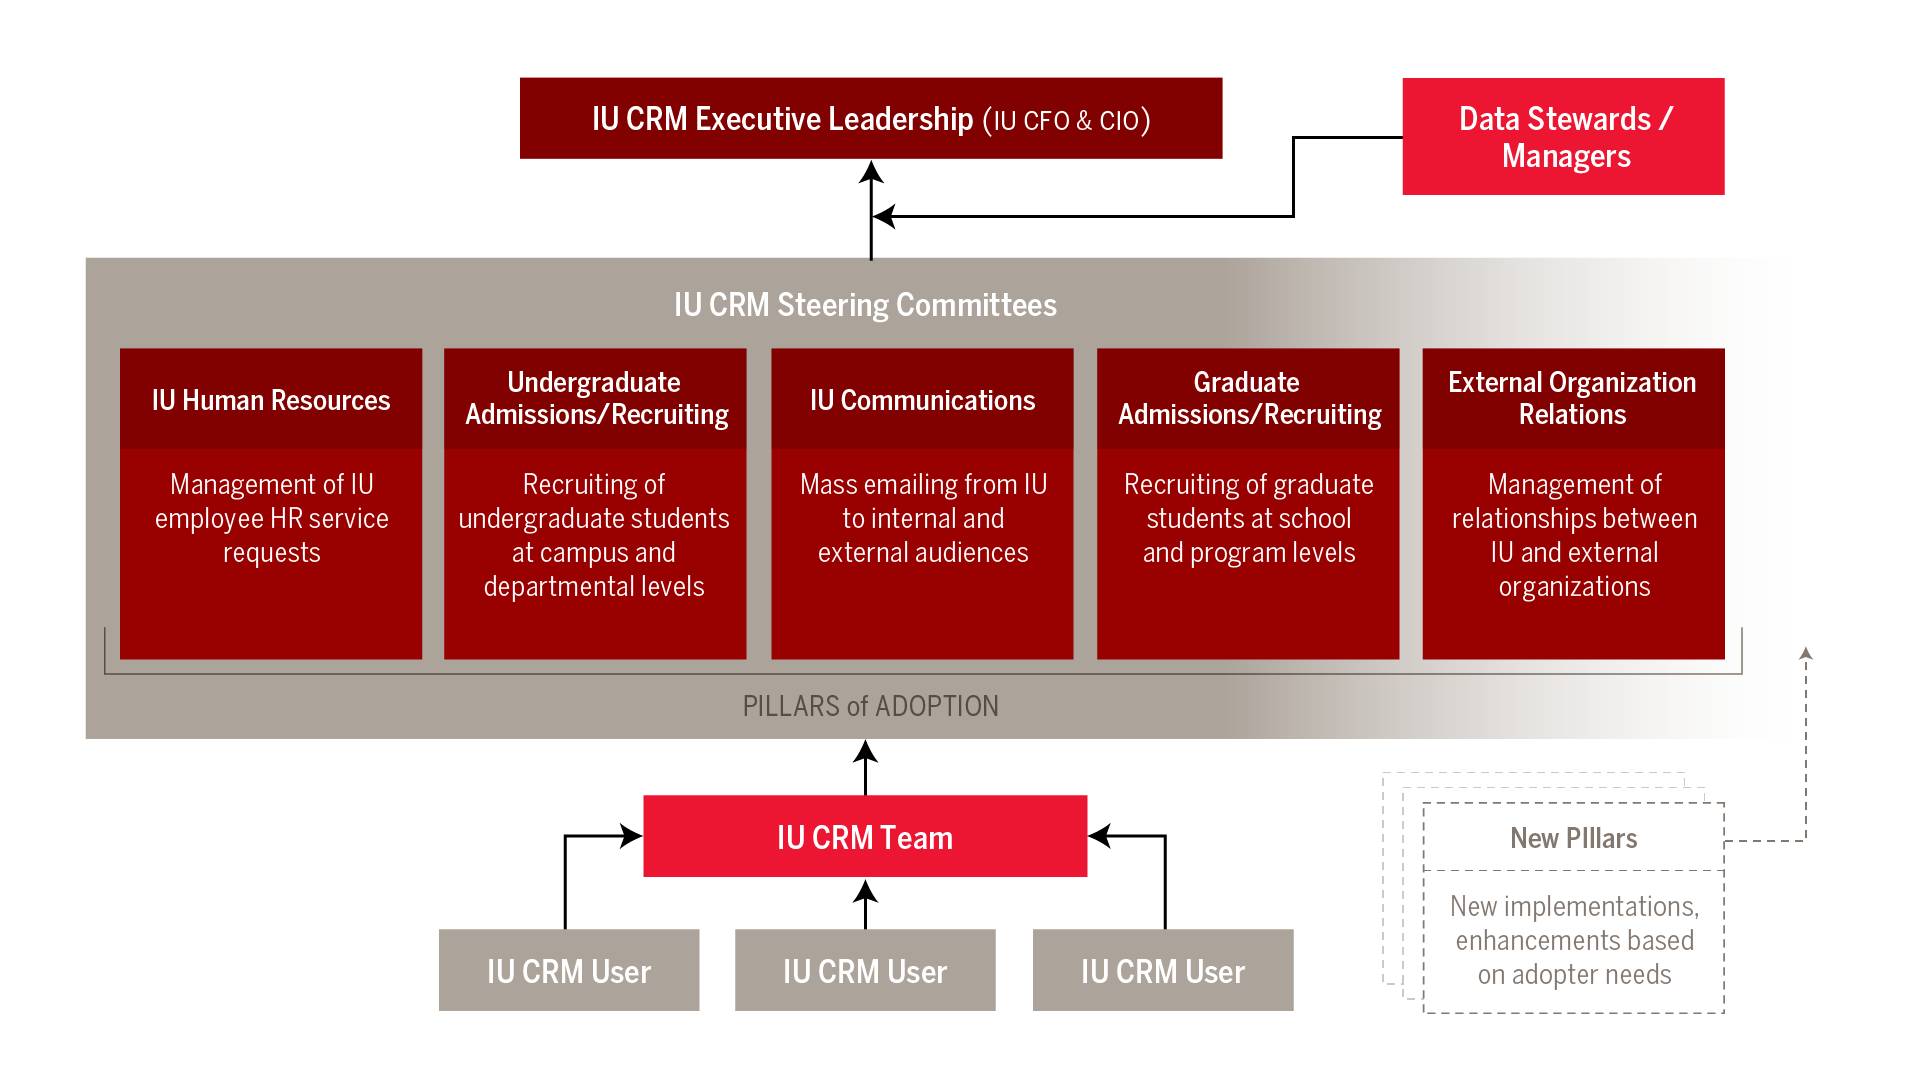 IU CRM's governance structure